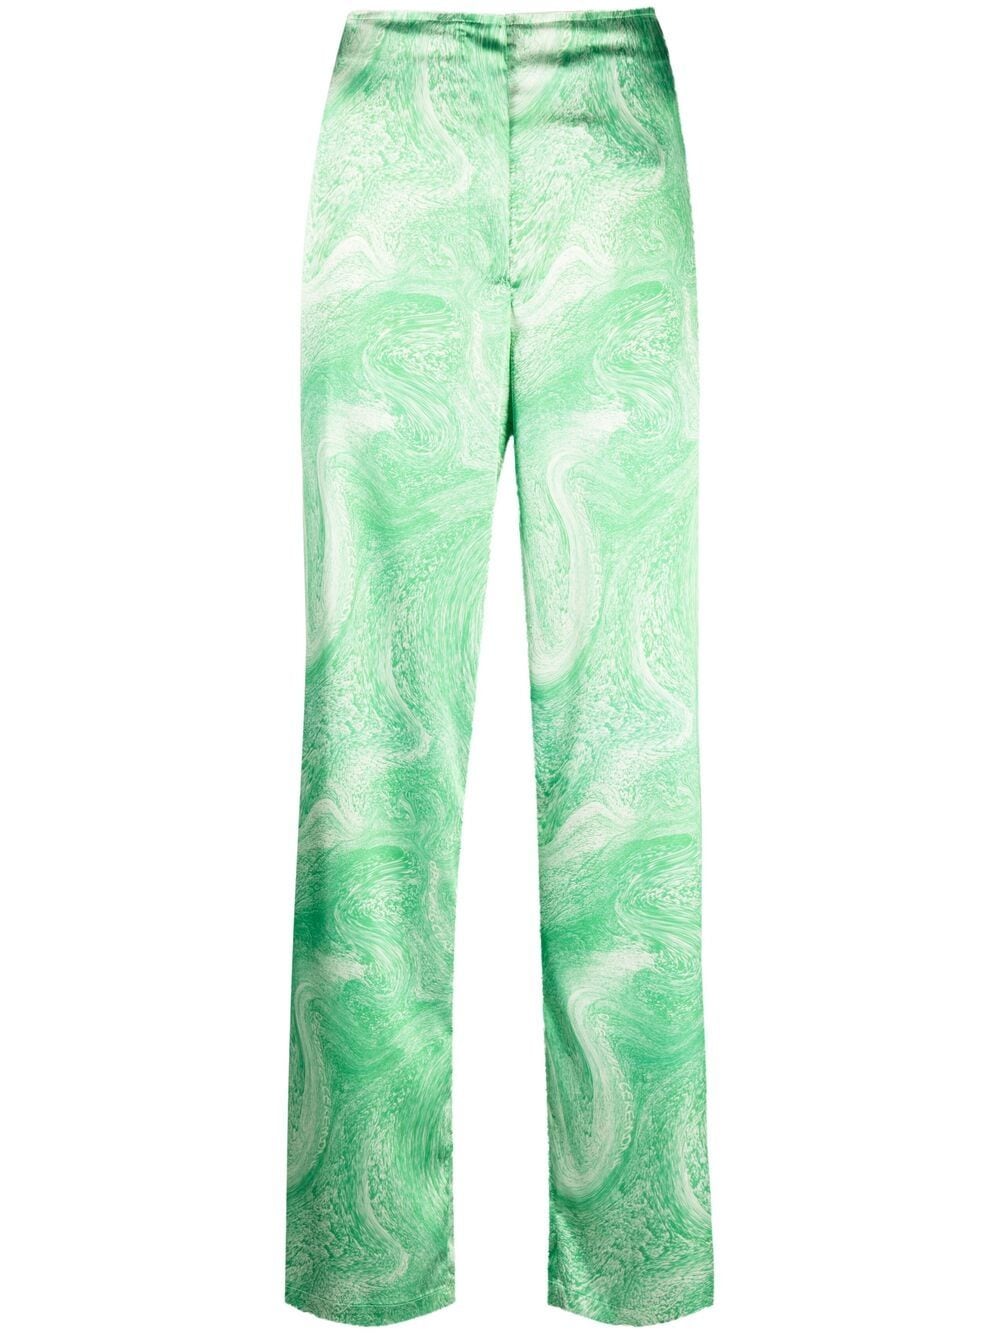 OPENING CEREMONY MARBLE-EFFECT STRAIGHT-LEG TROUSERS